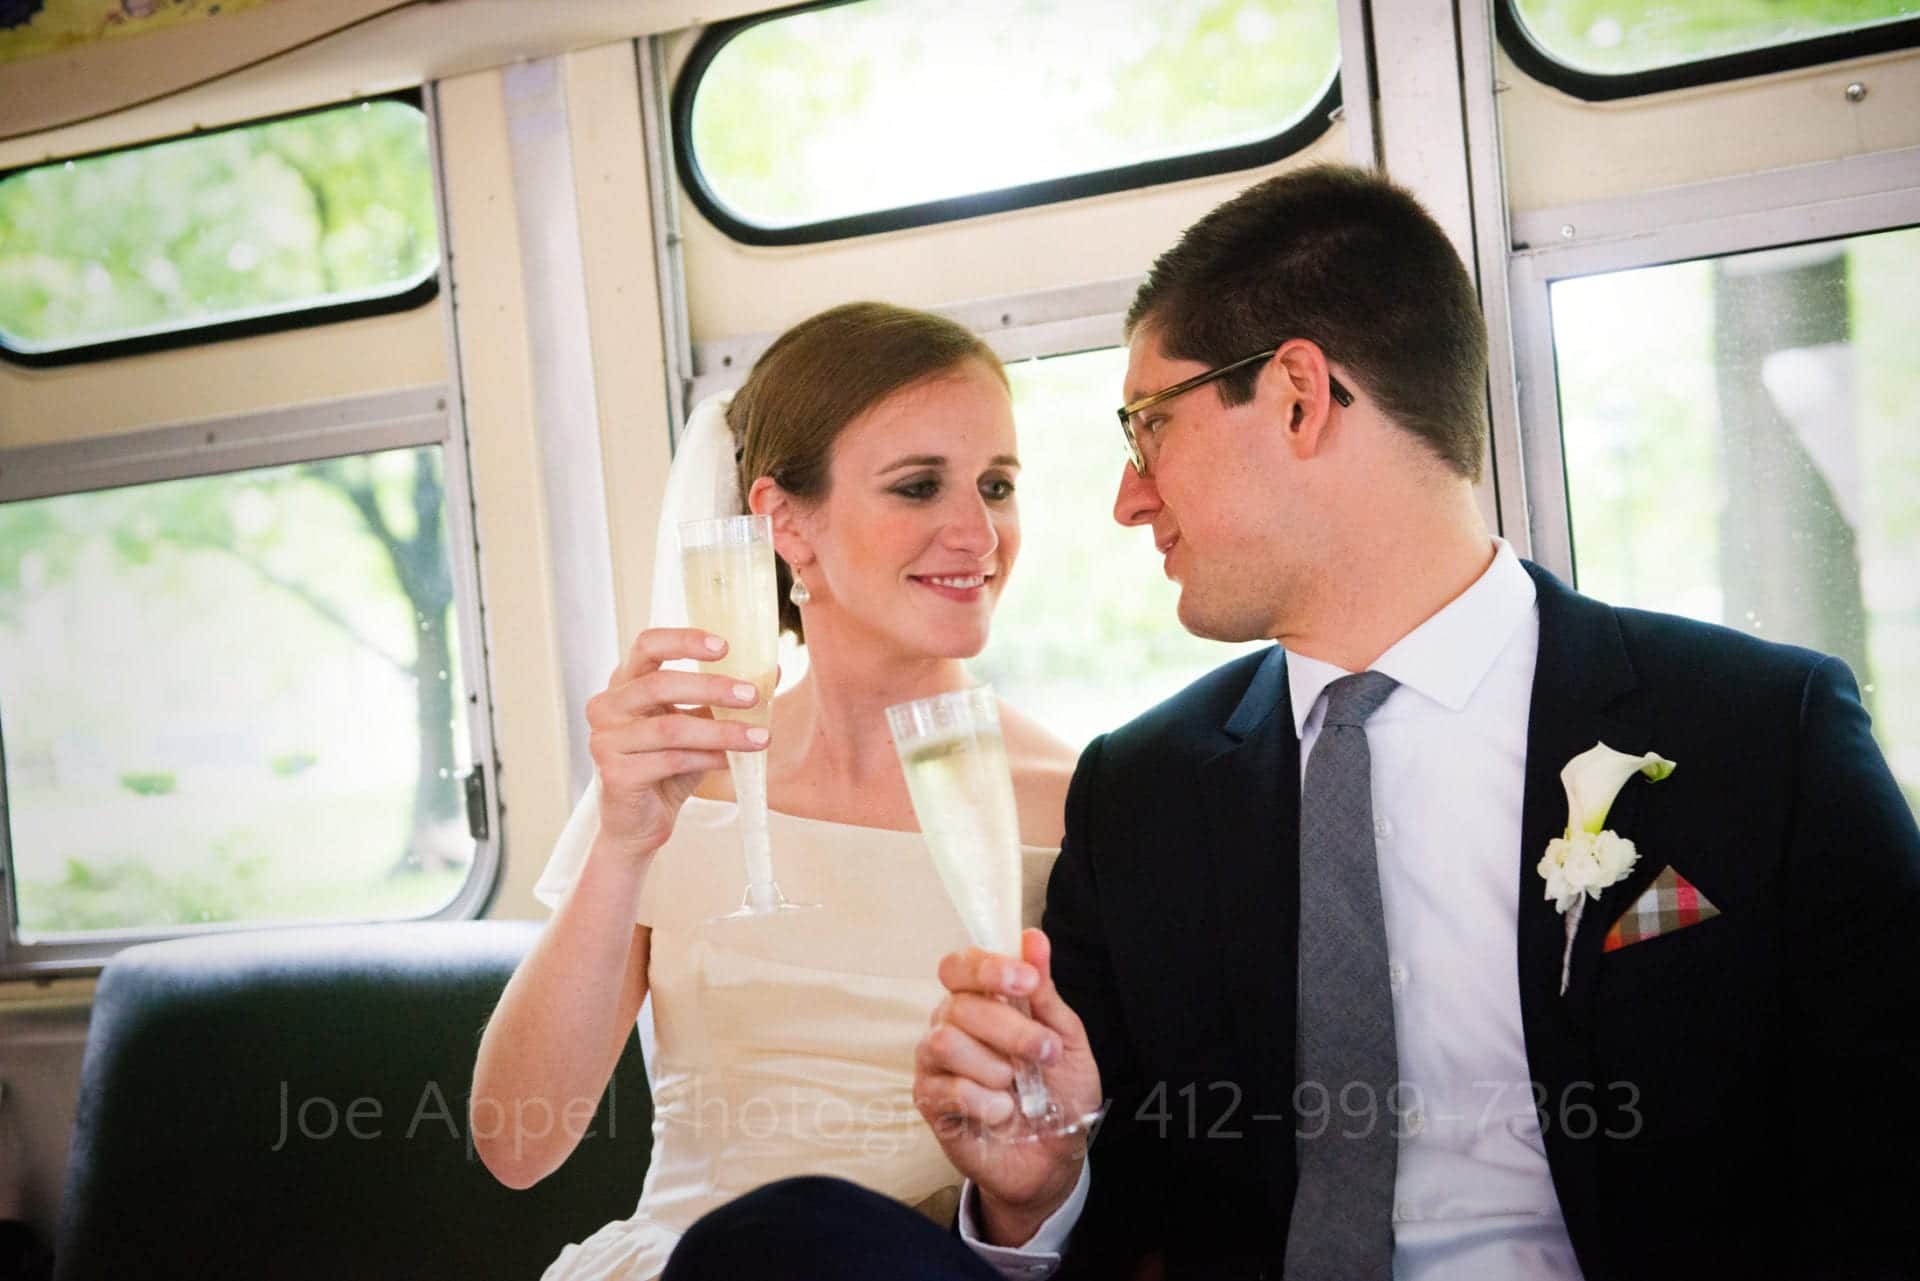 A bride and groom toast with plastic flutes filled with champagne as they sit side-by-side on a vintage bus.